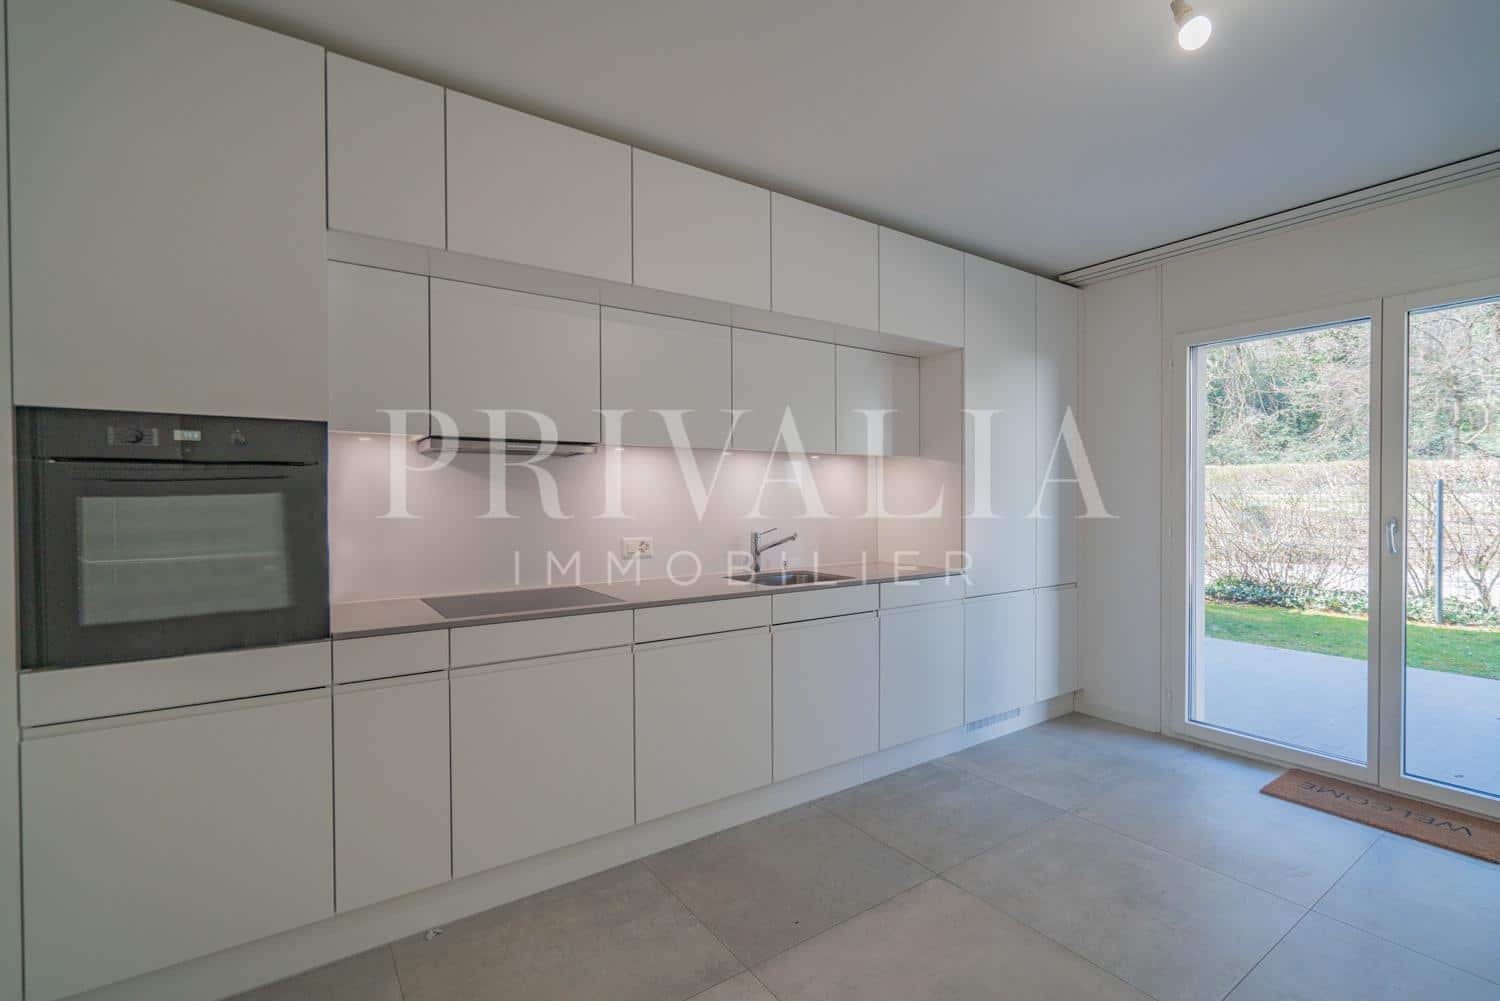 PrivaliaBeautiful 7.5 room flat with garden and terrace in a secure residence